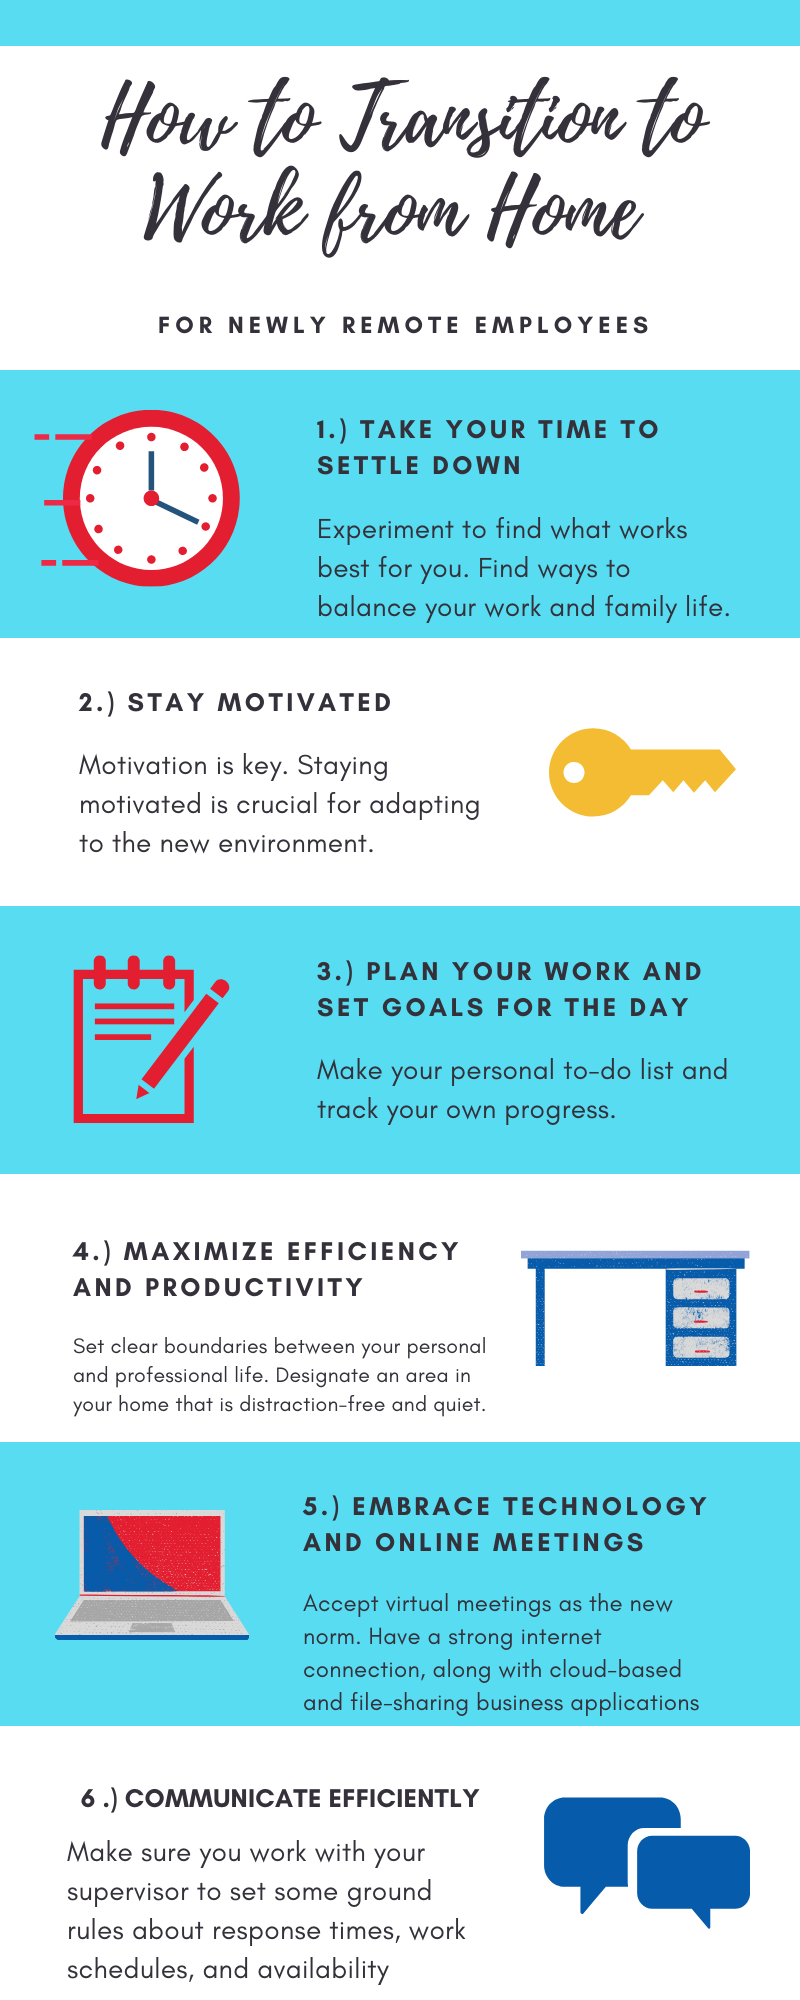 https://runneredq.com/wp-content/uploads/2020/06/Infographic-How-to-Transition-to-Work-from-Home.png